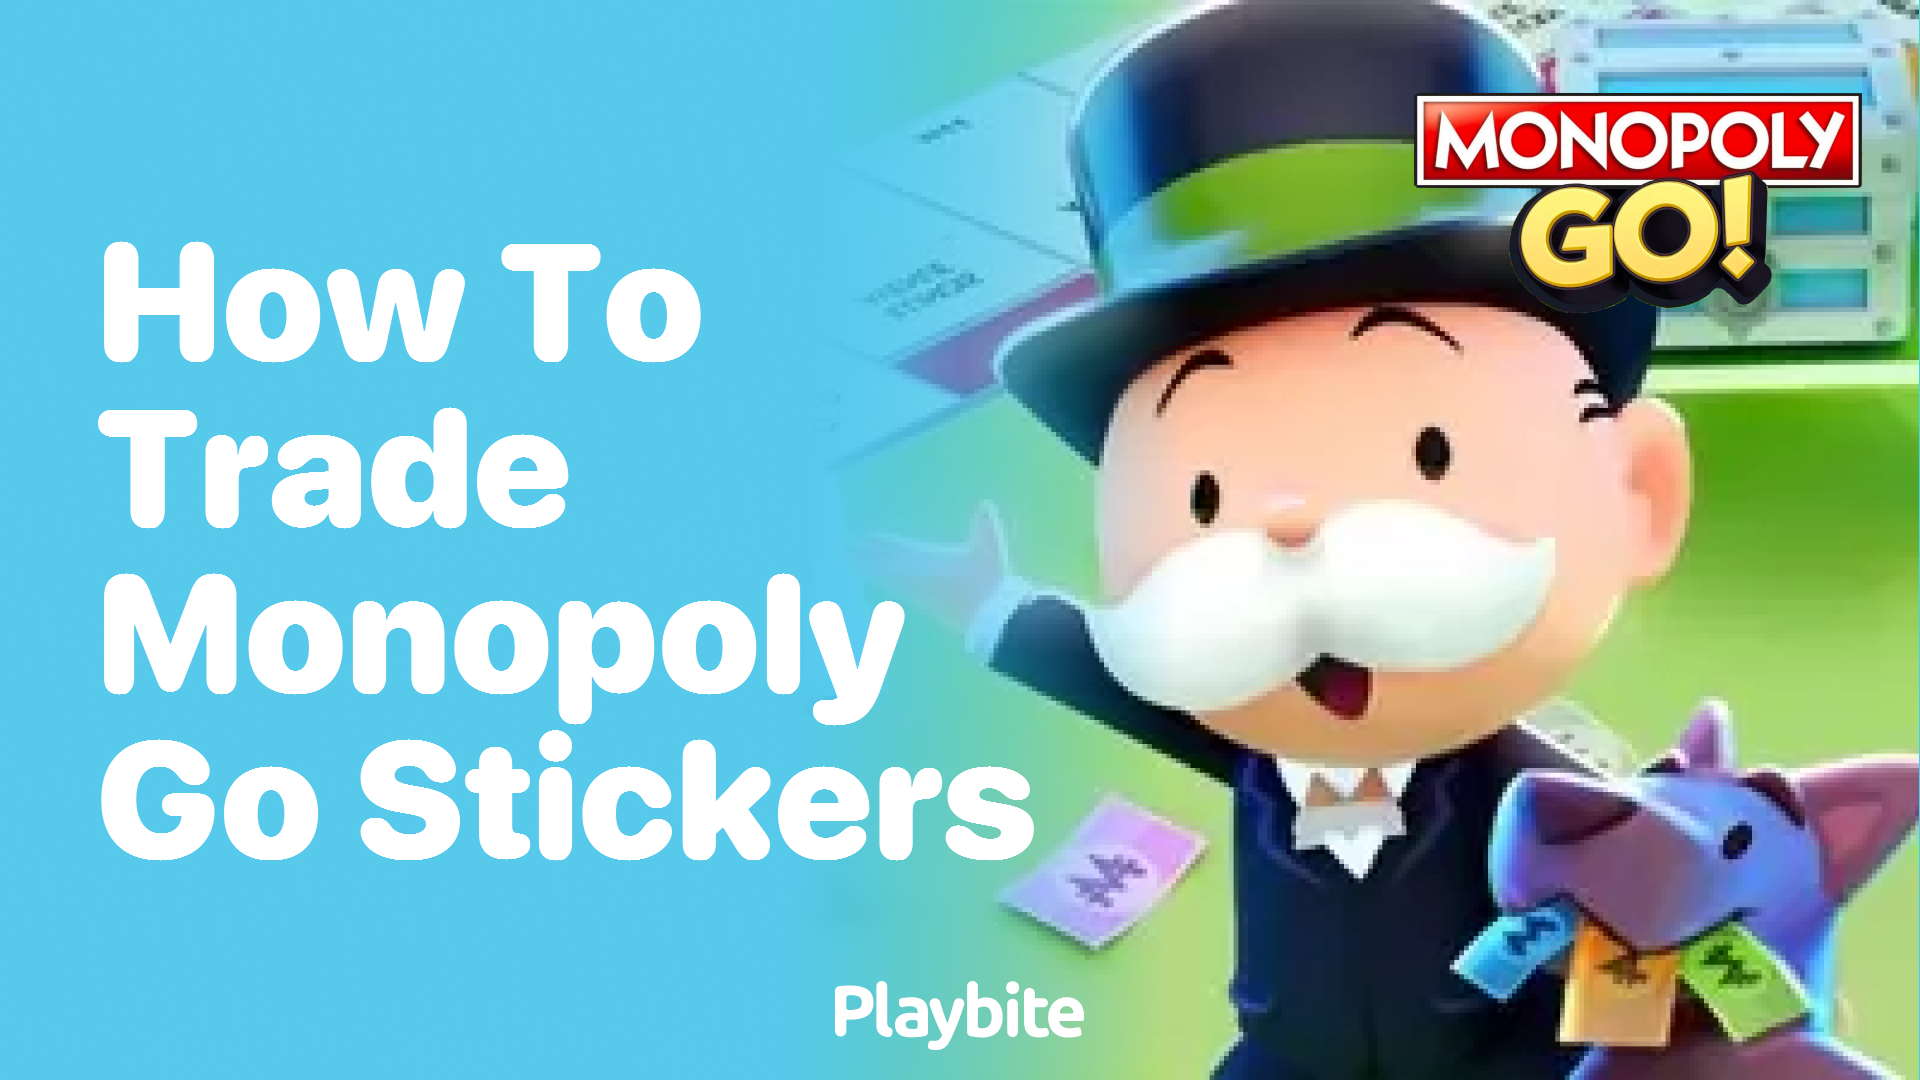 How to Trade Monopoly Go Stickers: A Simple Guide